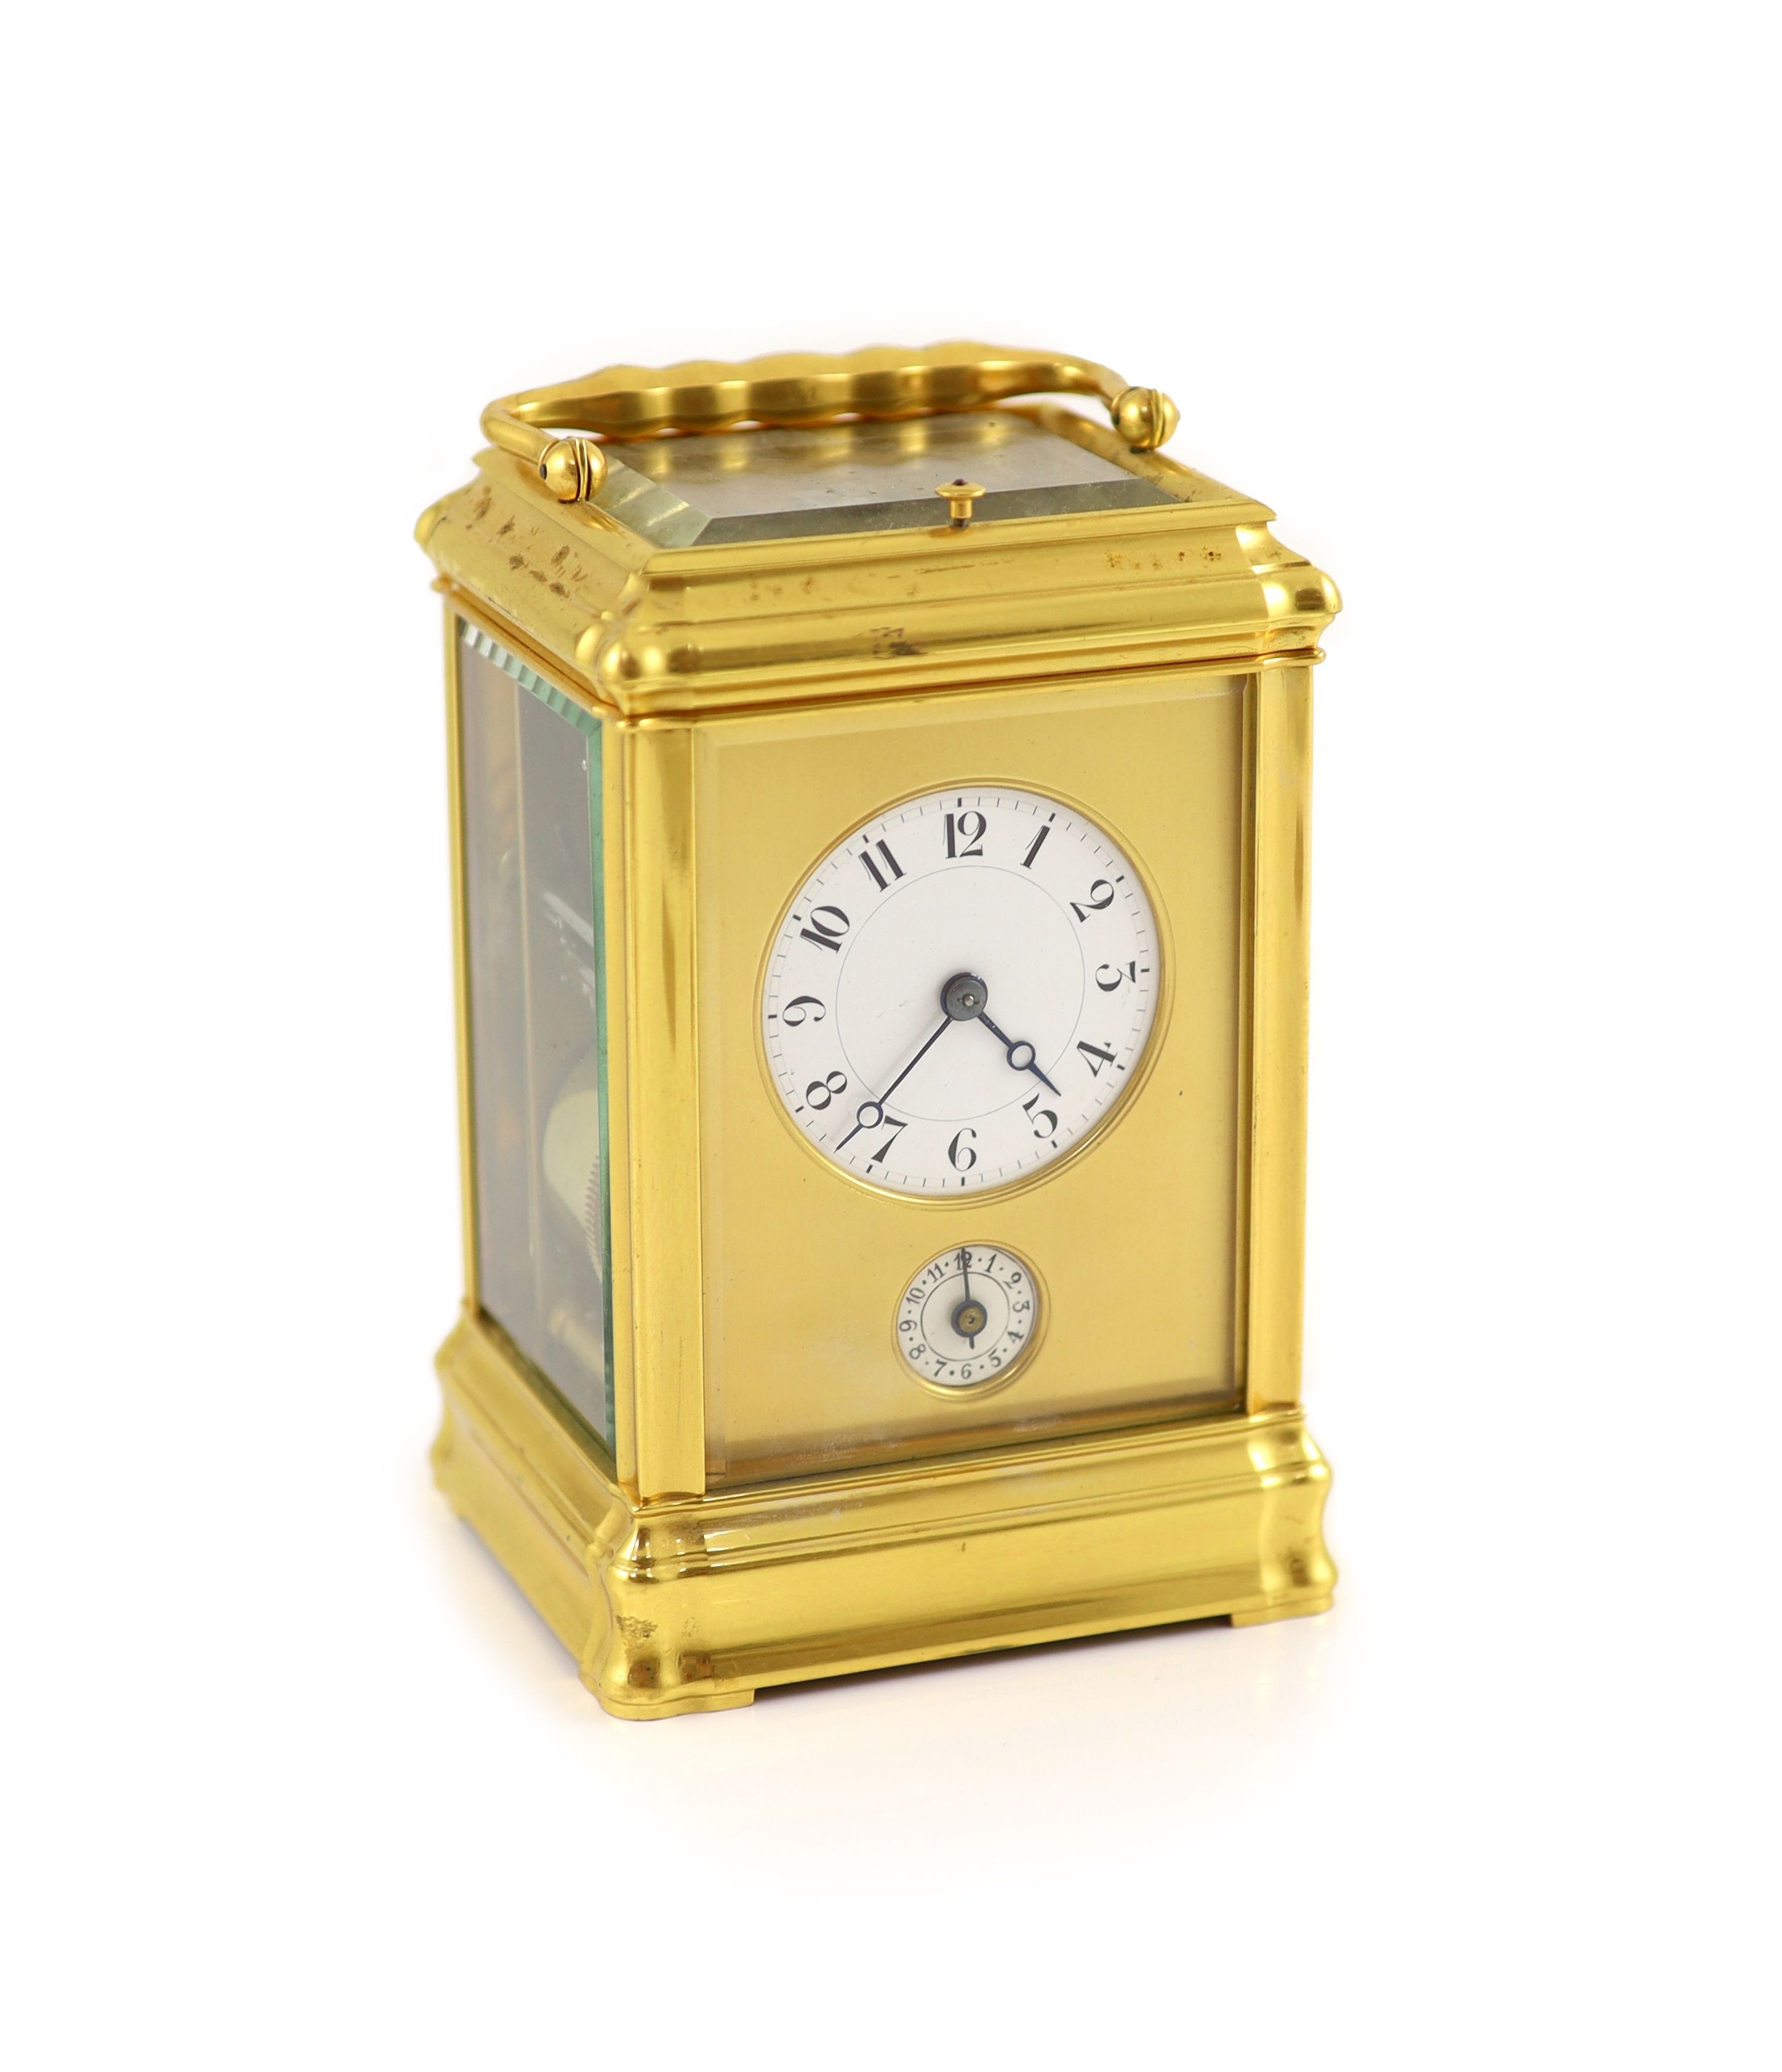 An early 20th century French quarter repeating Grand Sonnerie carriage alarum clock H 15cm. W 9.5cm. D 8.5cm.